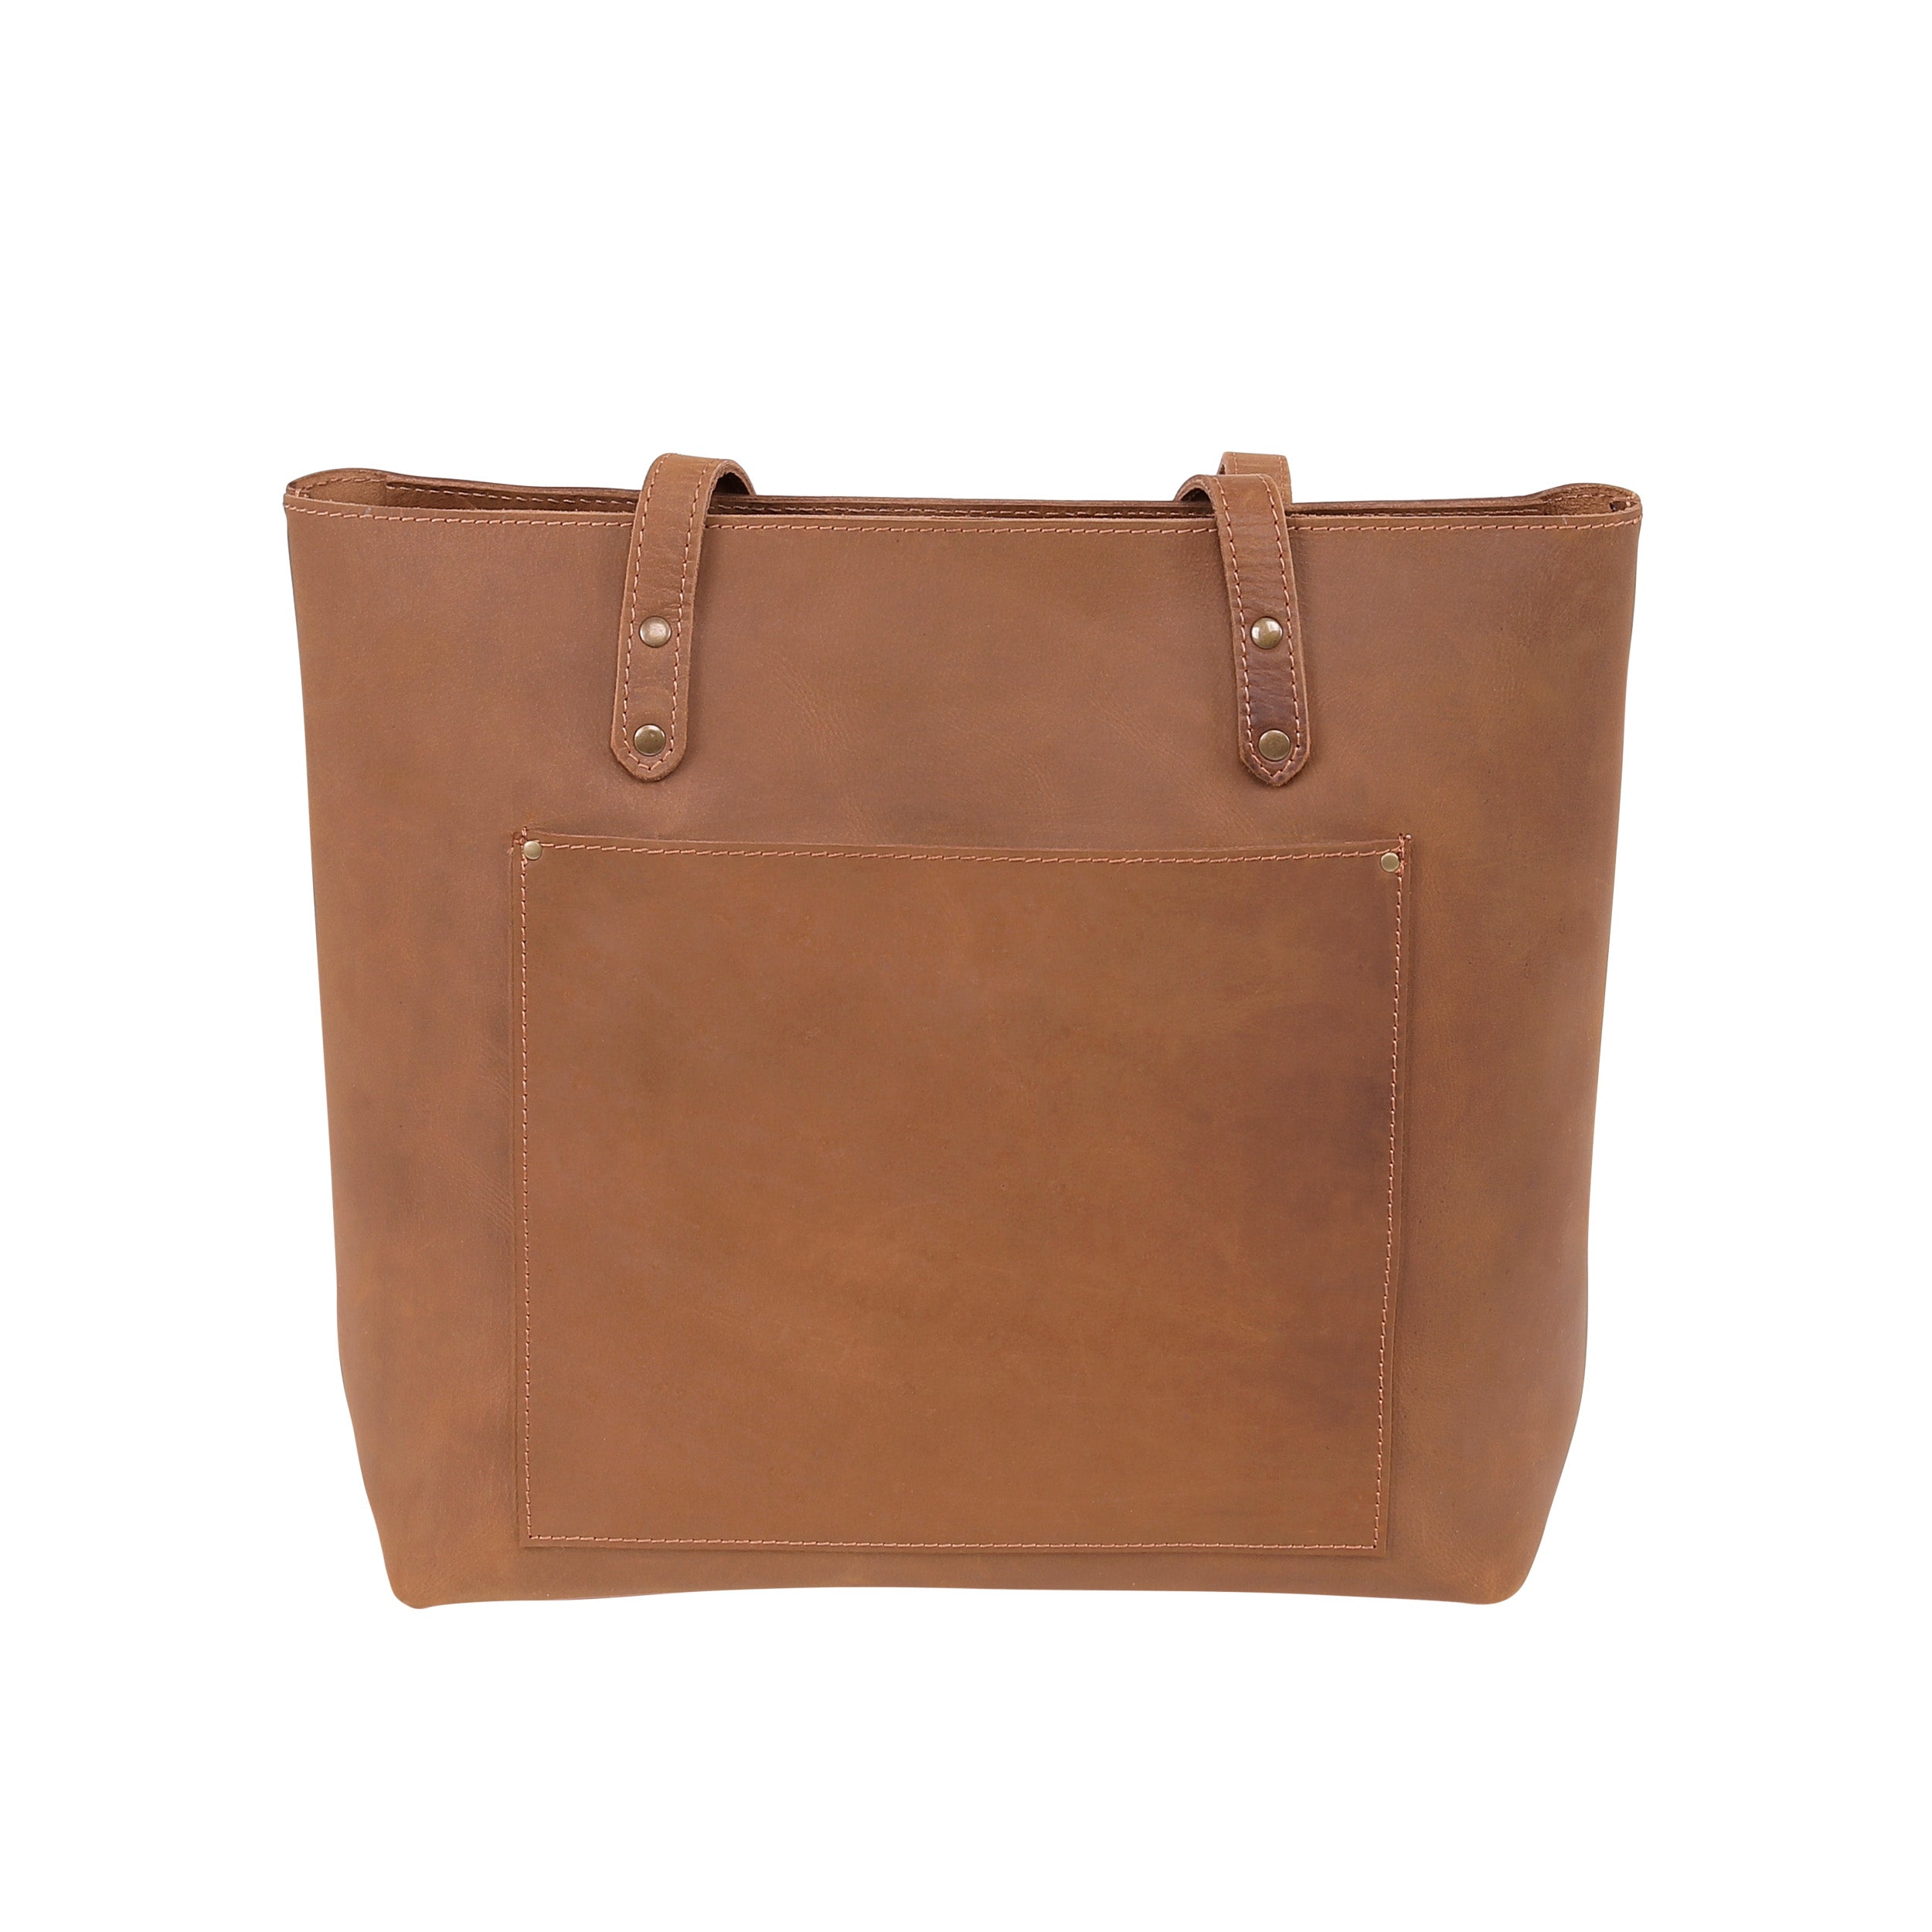 Leather Tote Bag 9917 - Light Brown